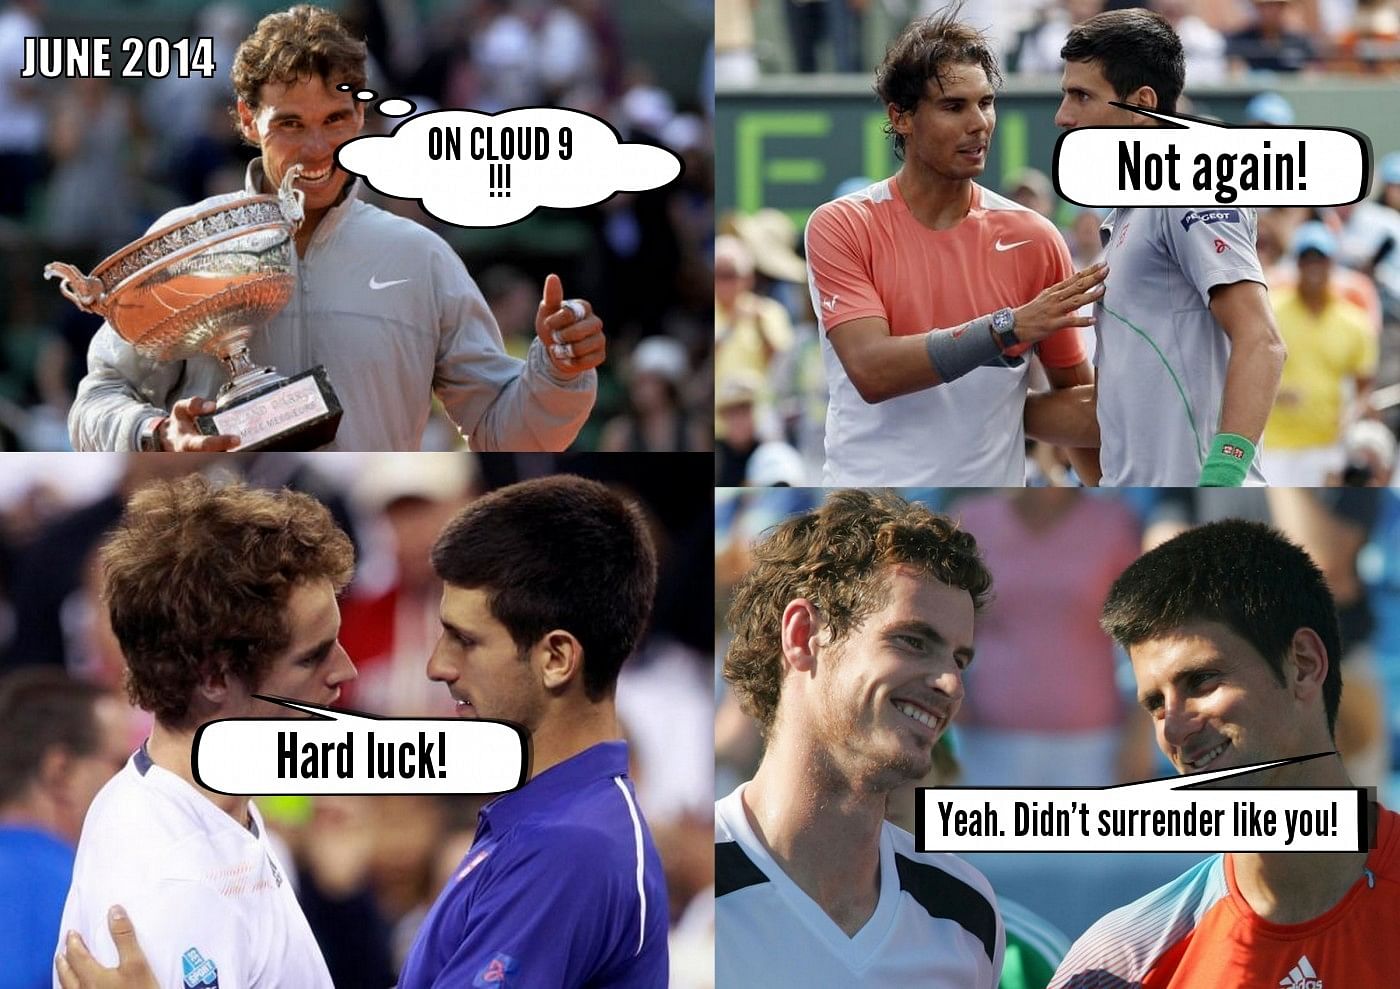 Humour: The REAL conversations between tennis players